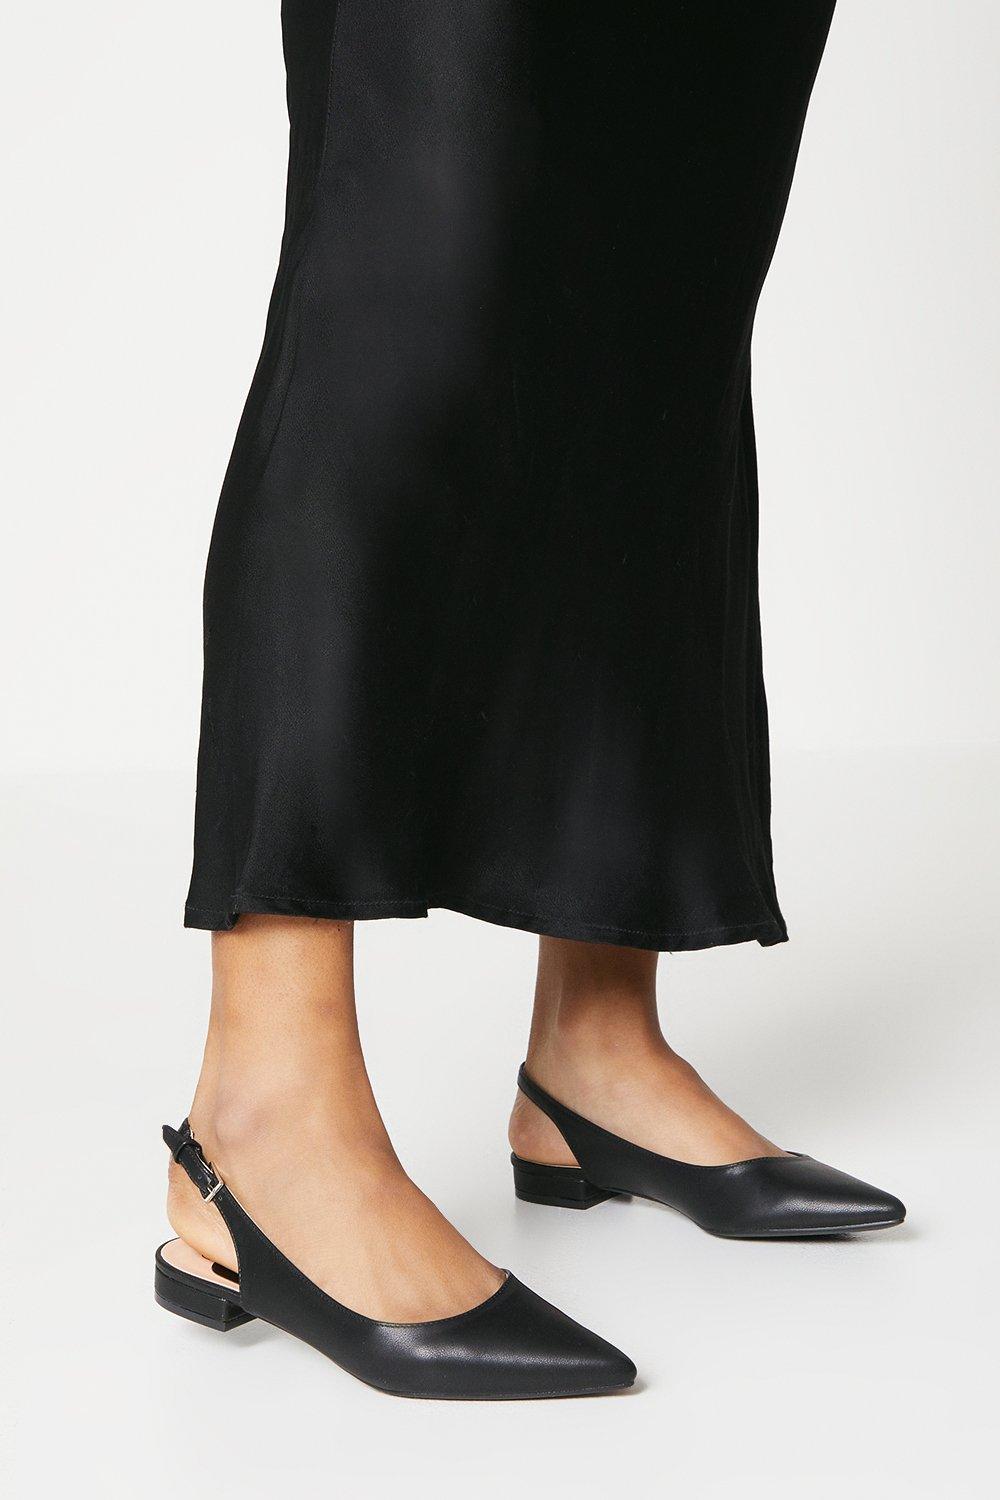 Women’s Pippin Pointed Slingback Ballet Pumps - black - 8